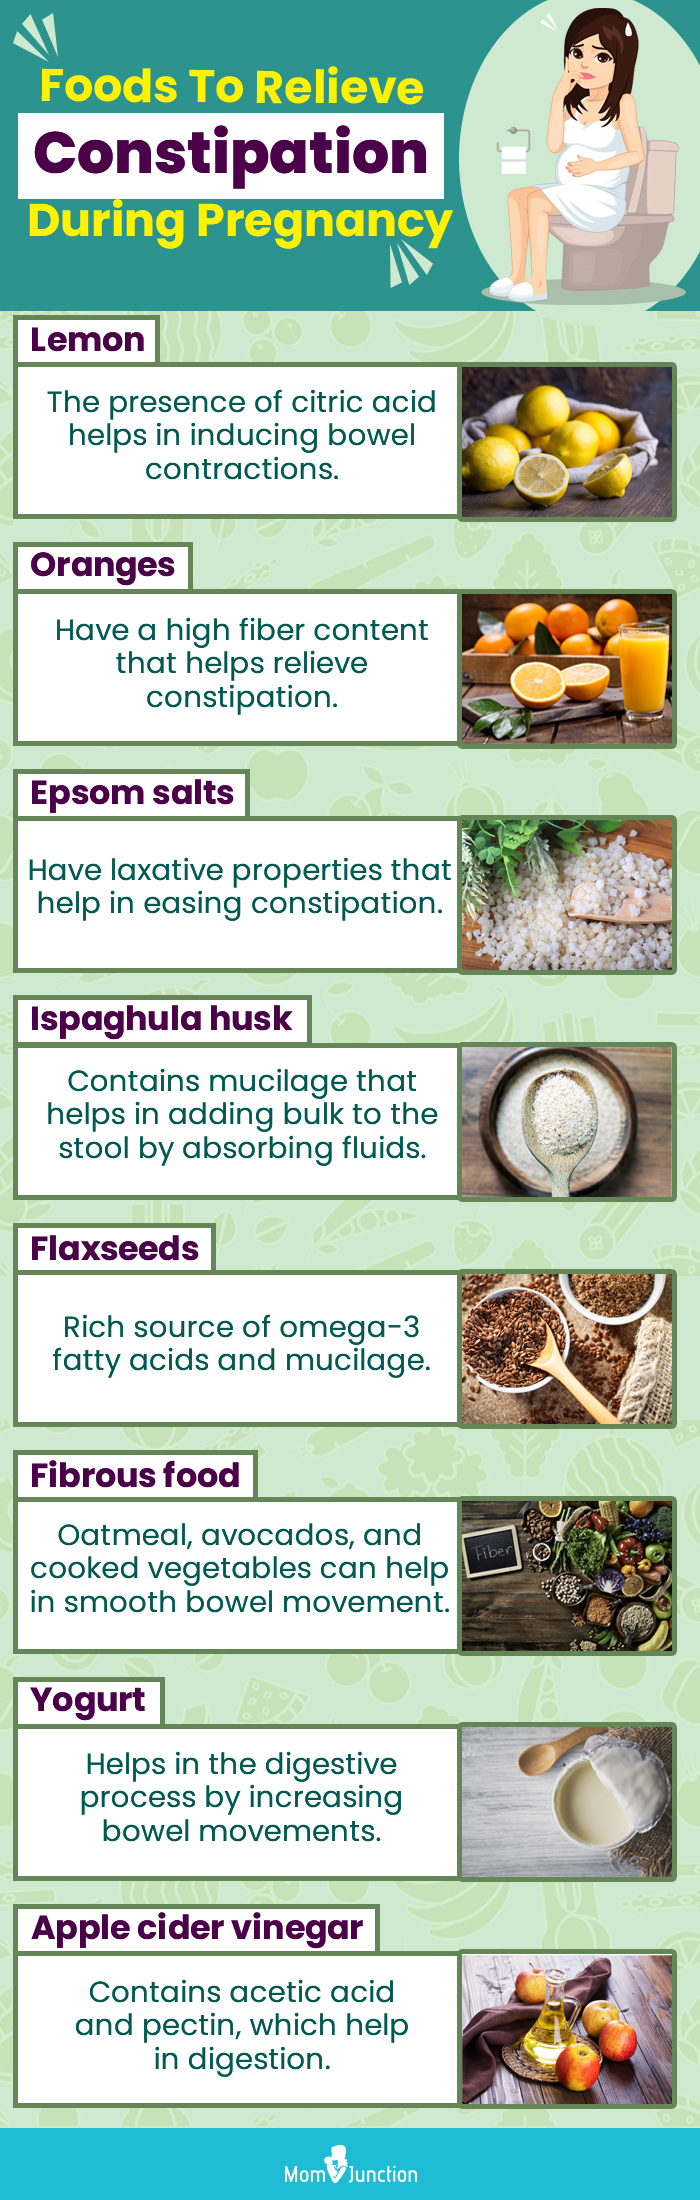 foods to relieve constipation during pregnancy (infographic)